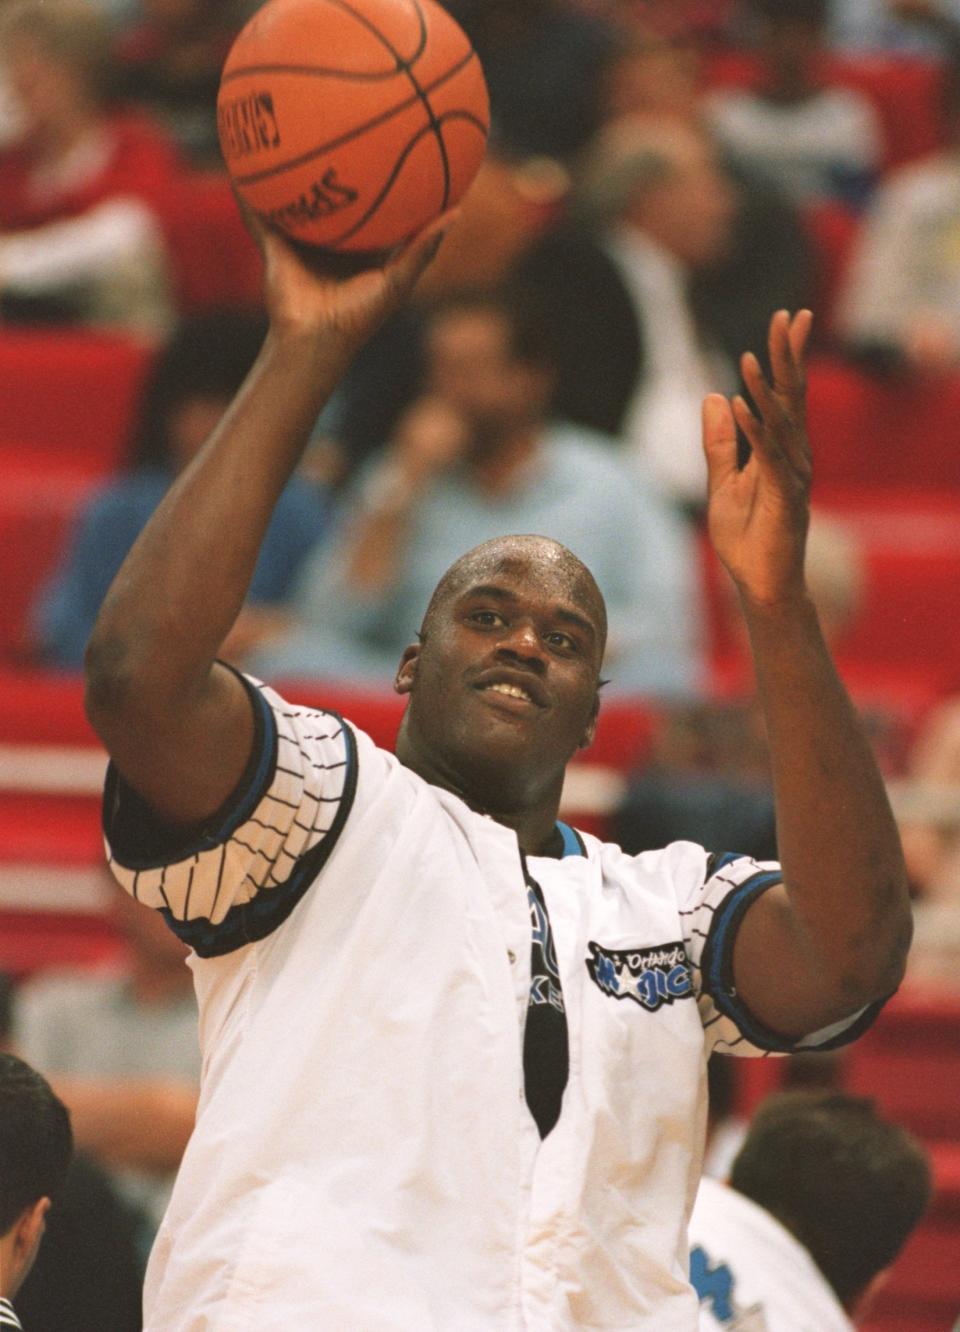 Shaquille O'Neal shoots during warm-ups before a 101-99 loss to the New York Knicks in Orlando, Florida.